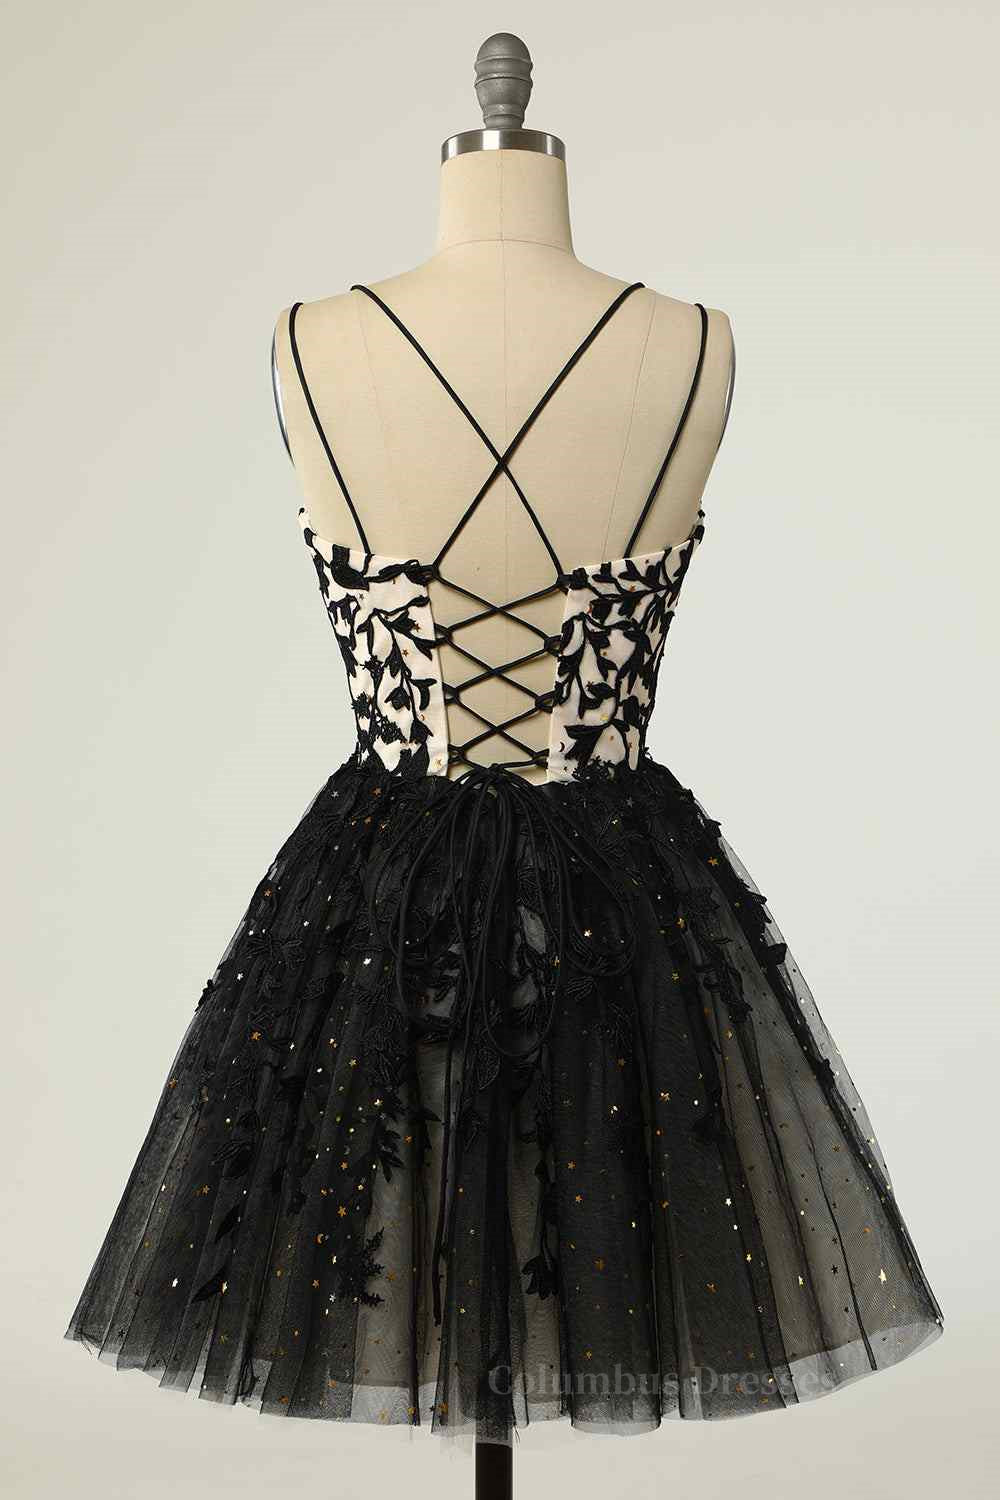 Bridesmaid Dresses Photos Gallery, Black A-line Double Spaghetti Straps Lace-Up Applique Mini Homecoming Dress